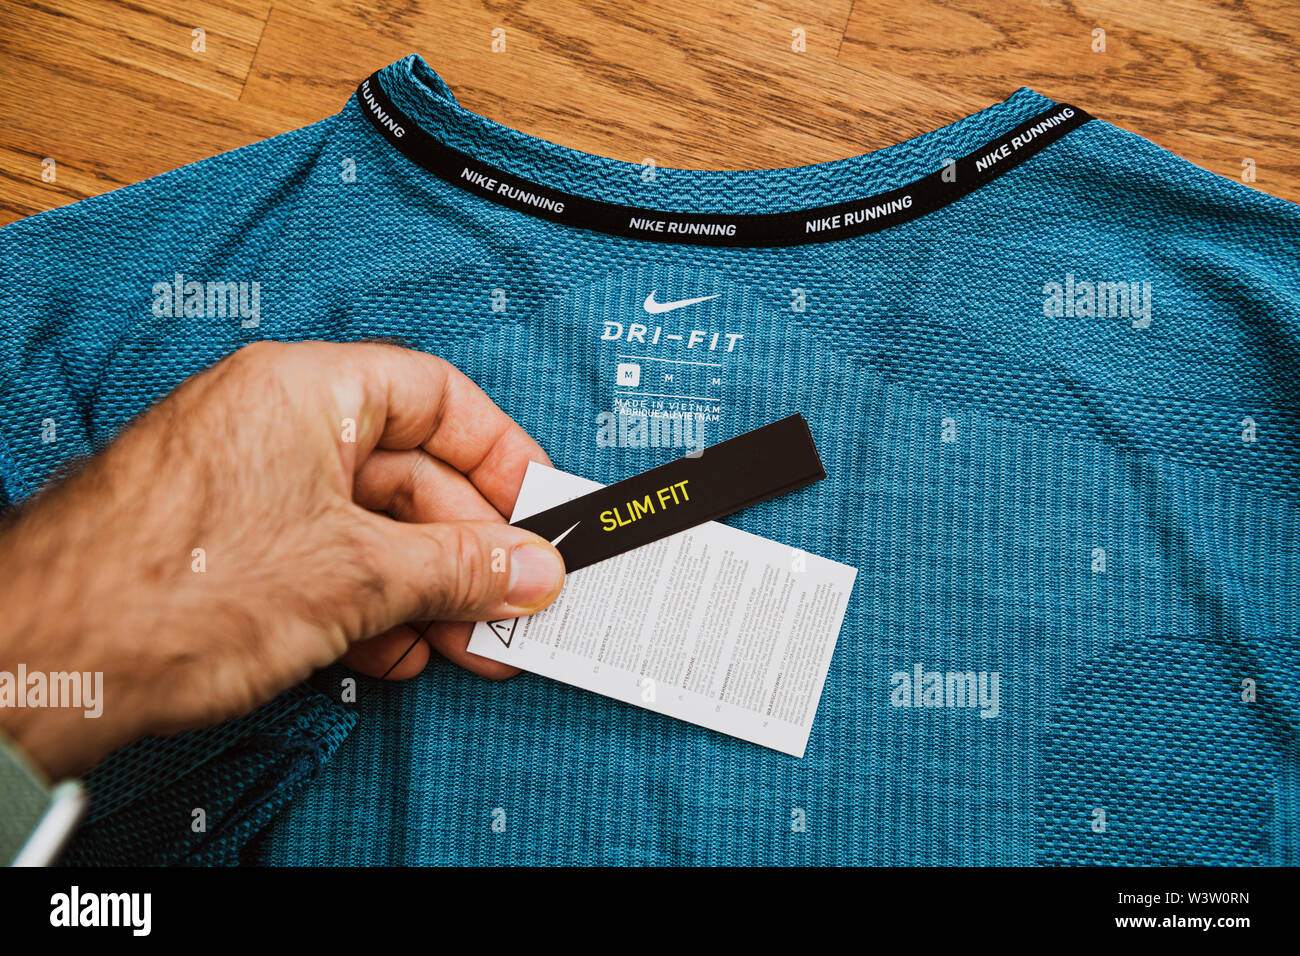 Paris, France - Jul 13, 2019: Man hand POV unboxing unpacking admiring  latest sport clothes equipment for running manufactured byu Nike sportswear  slim fit size Dri Fi Made in Vietnam Stock Photo - Alamy